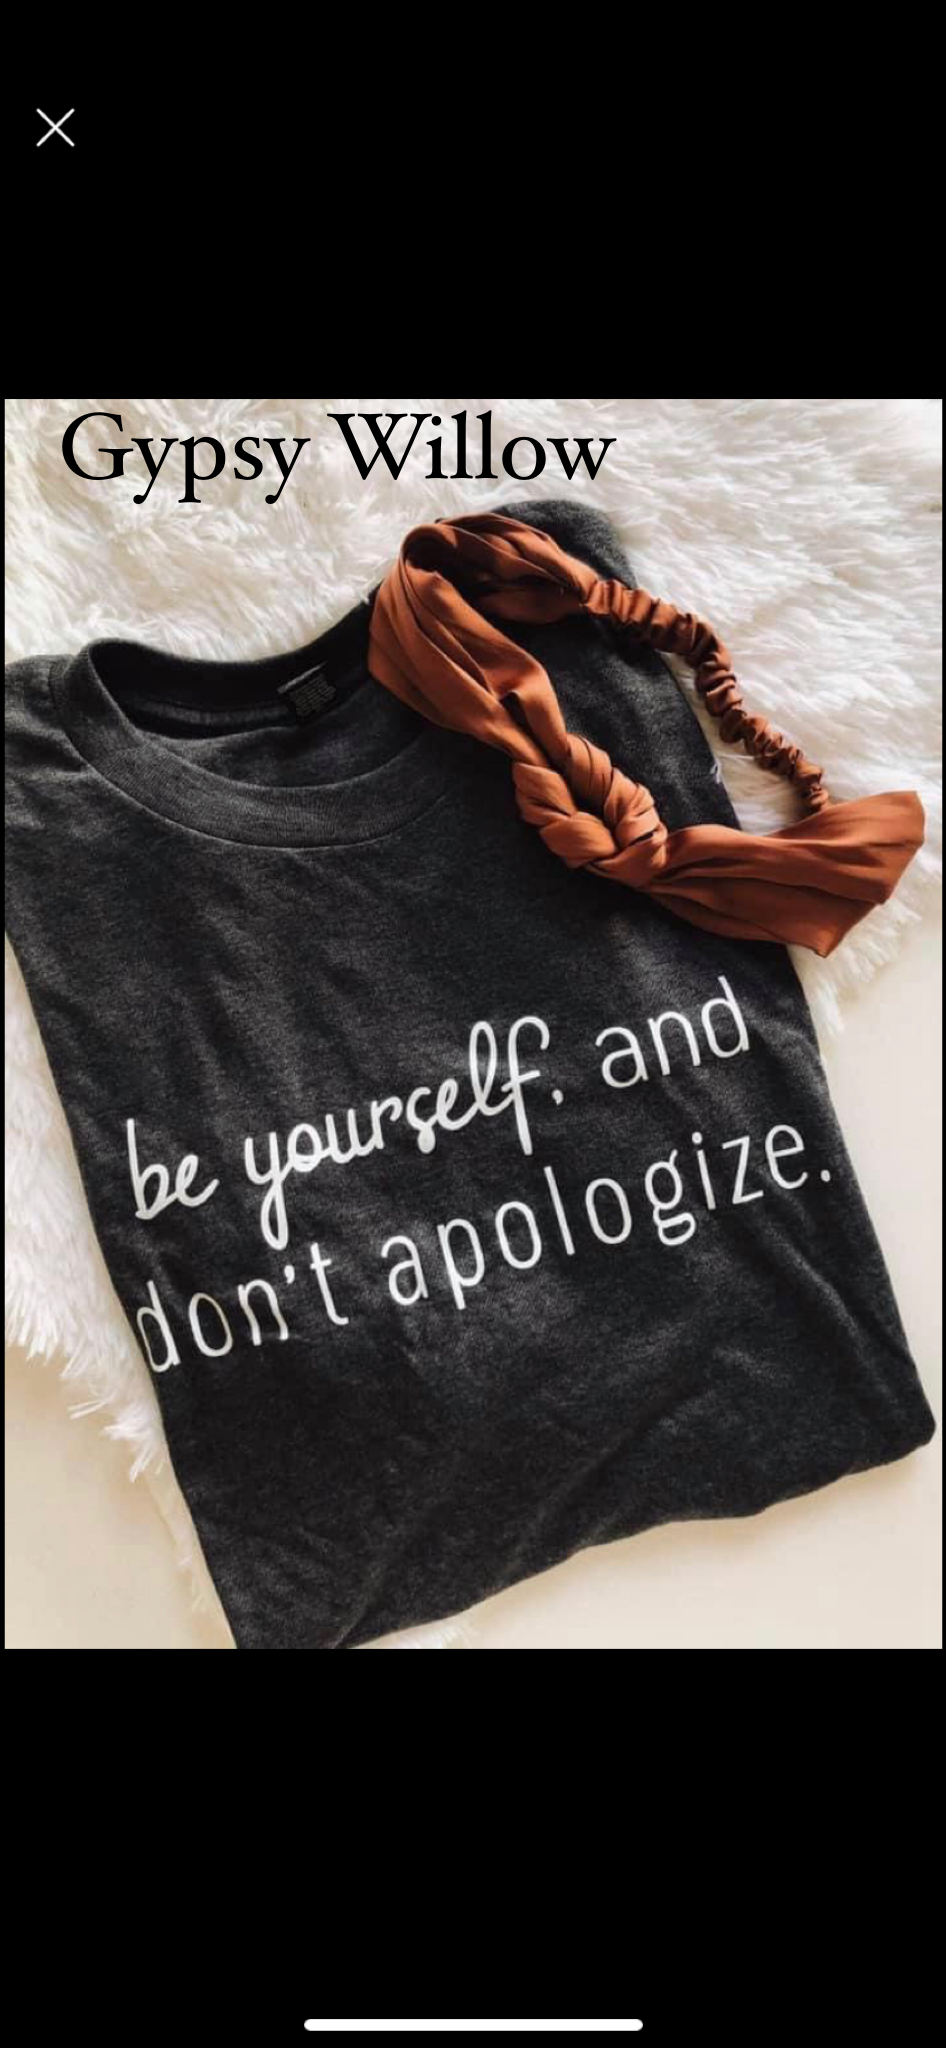 Be yourself, and don’t apologize